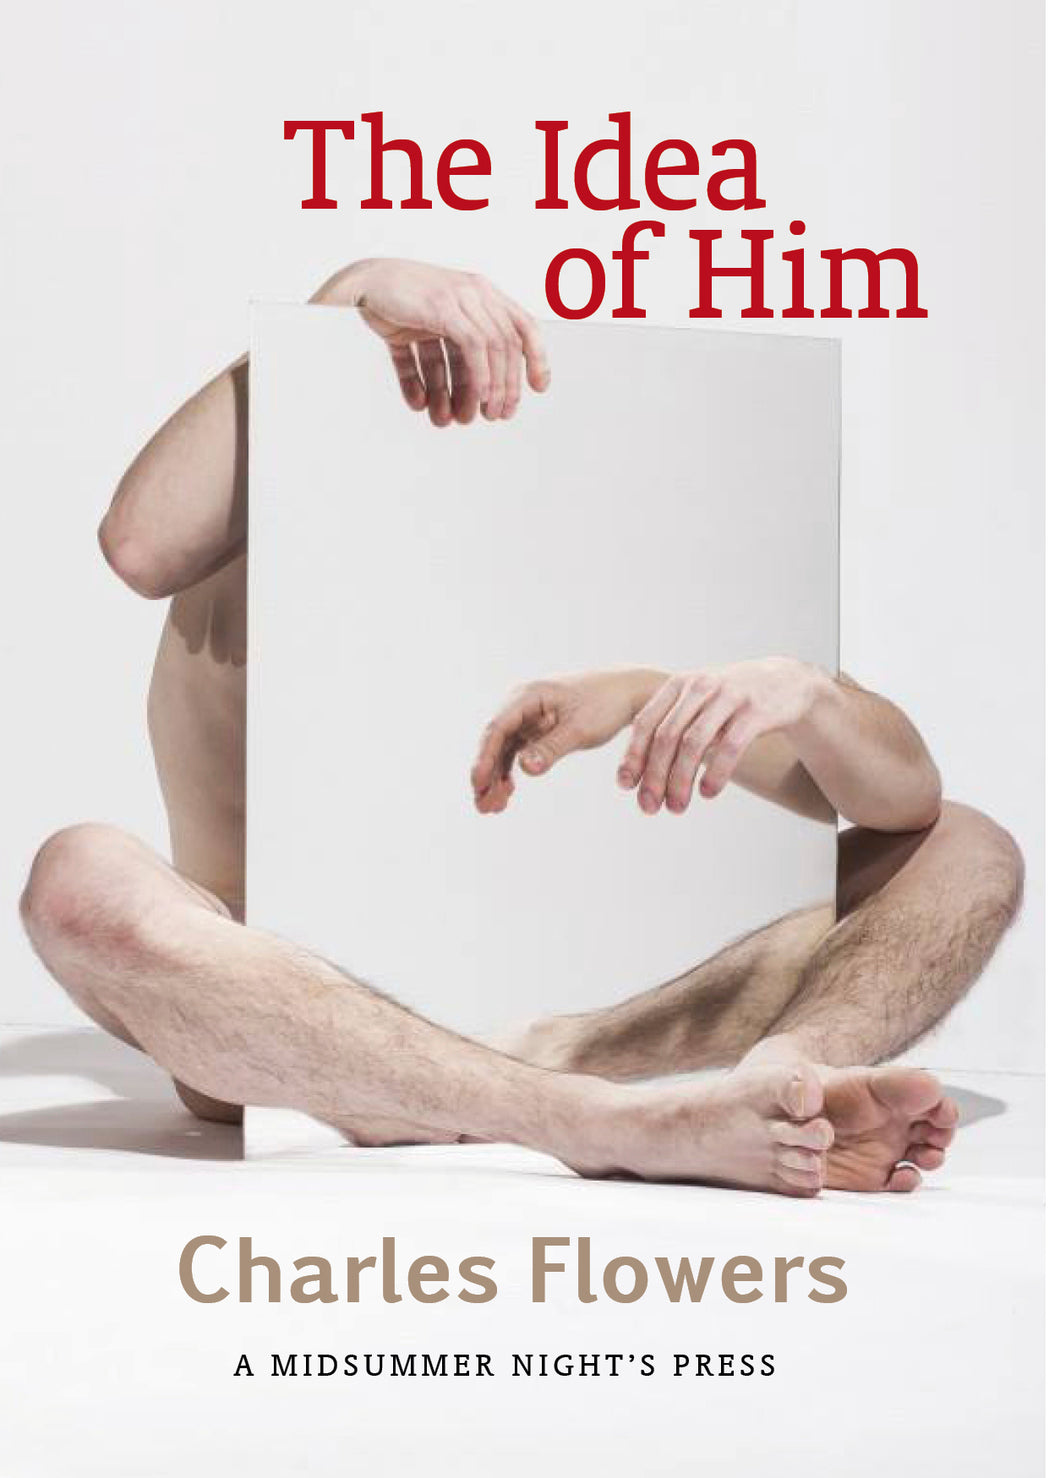 The Idea of Him by Charles Flowers